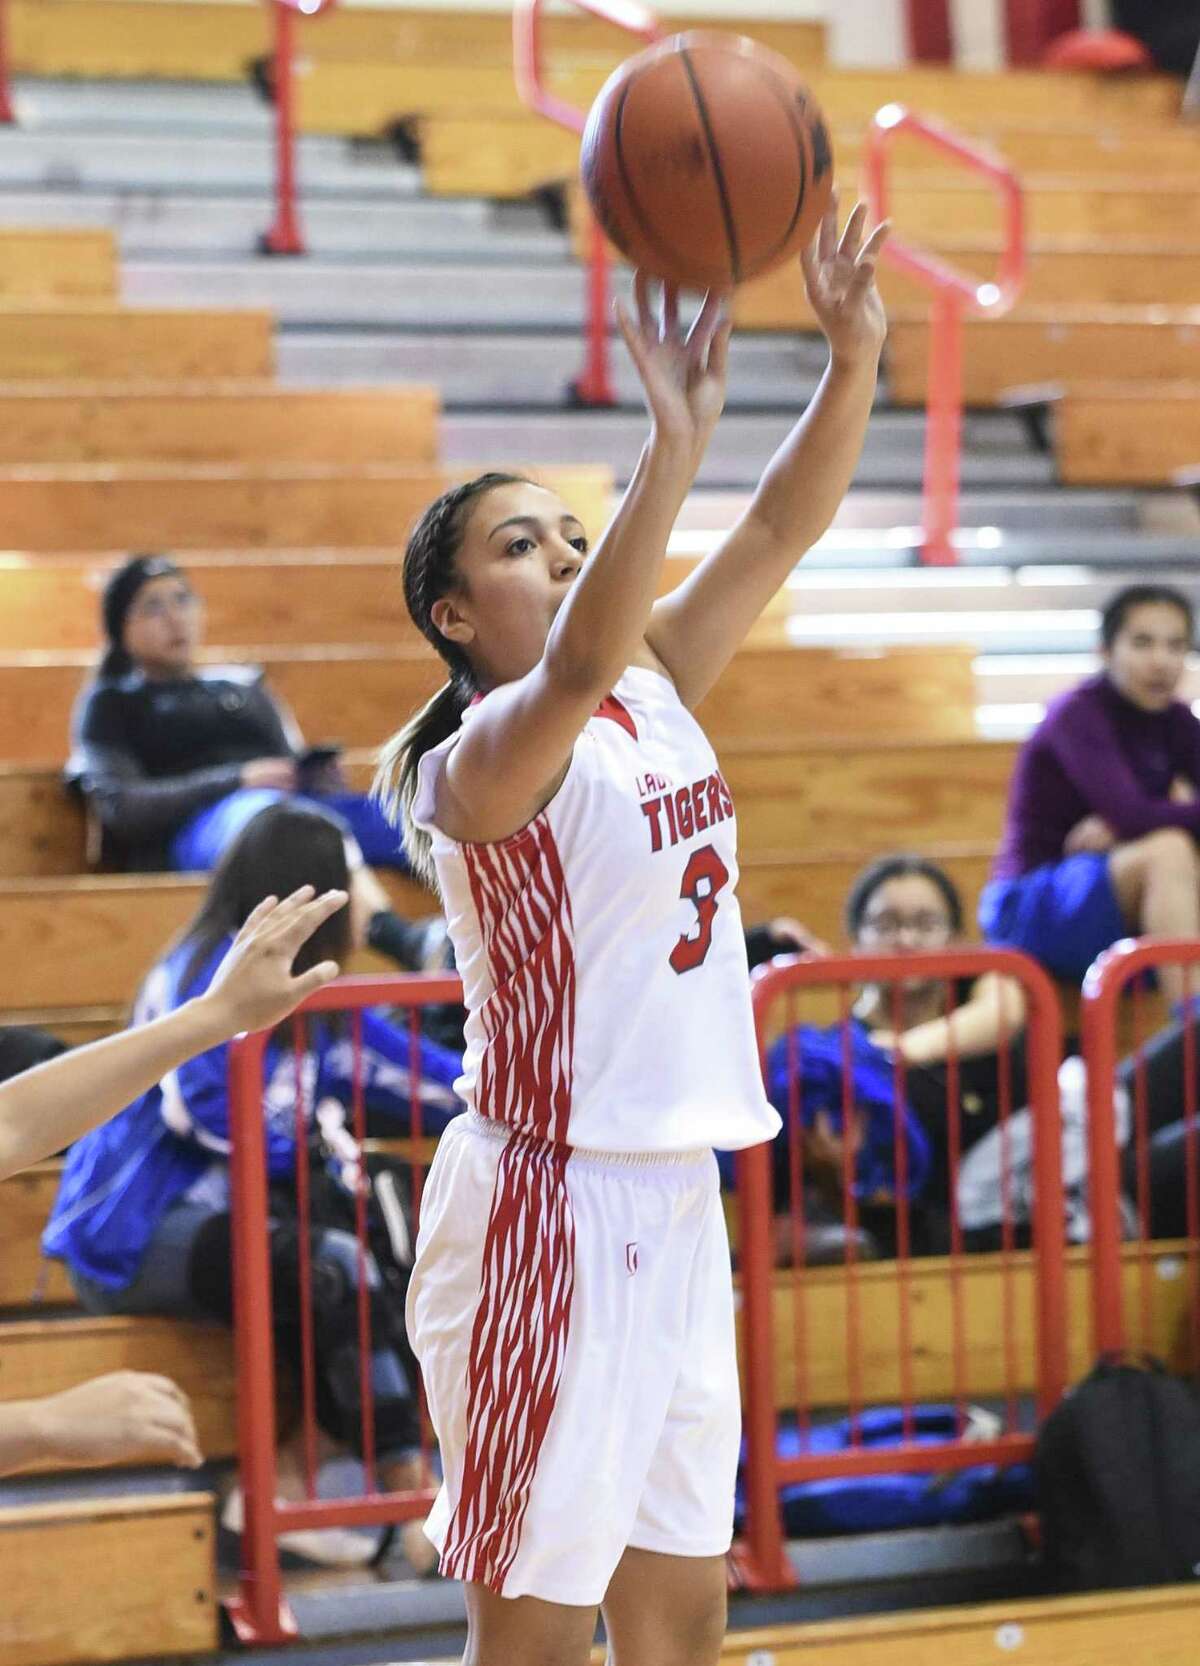 Alexis Garcia scored nine points in Martin’s 39-35 win over Cigarroa Friday.